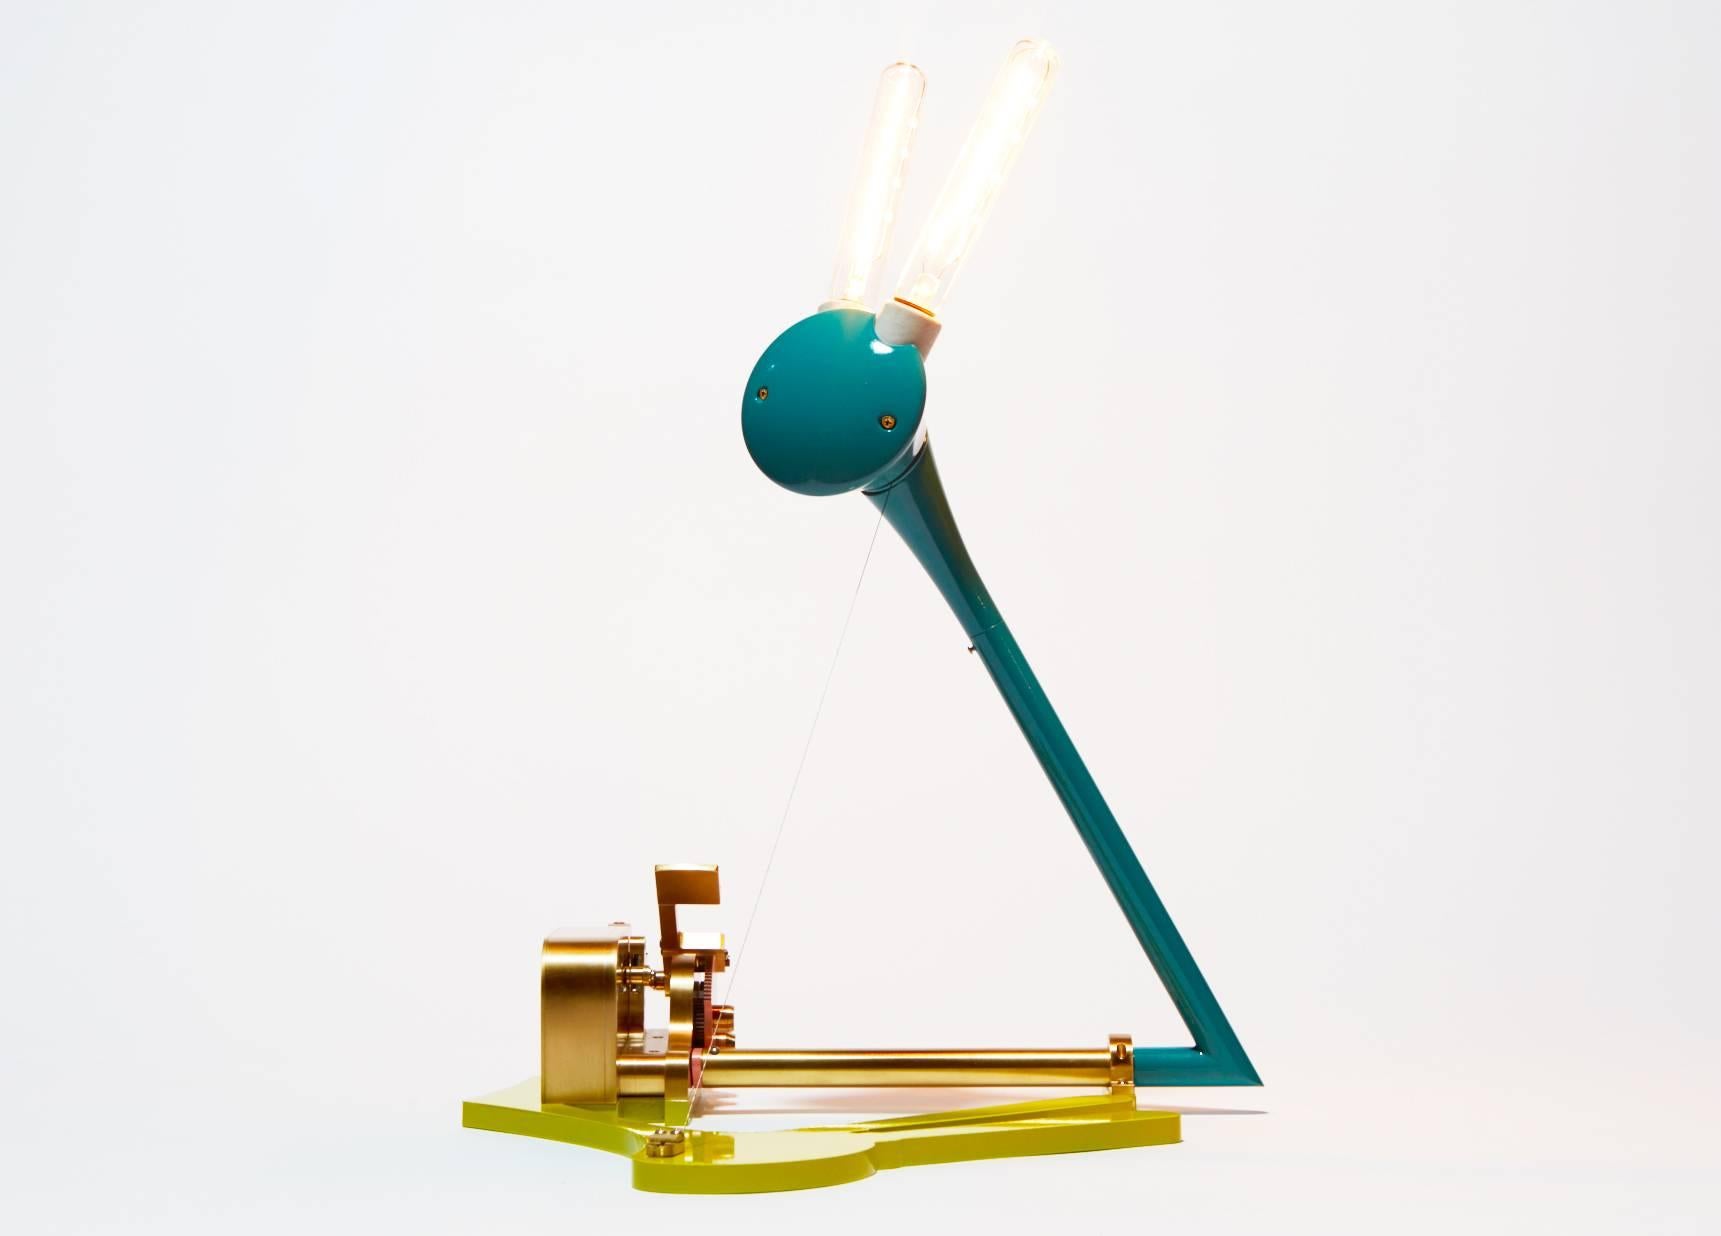 Every component of this contemporary light sculpture is handmade. A custom mechanical switch rotates the bulb assembly 180 degrees to bring this intricate assembly to life. In solid polished brass and lacquer in four color variations, and including